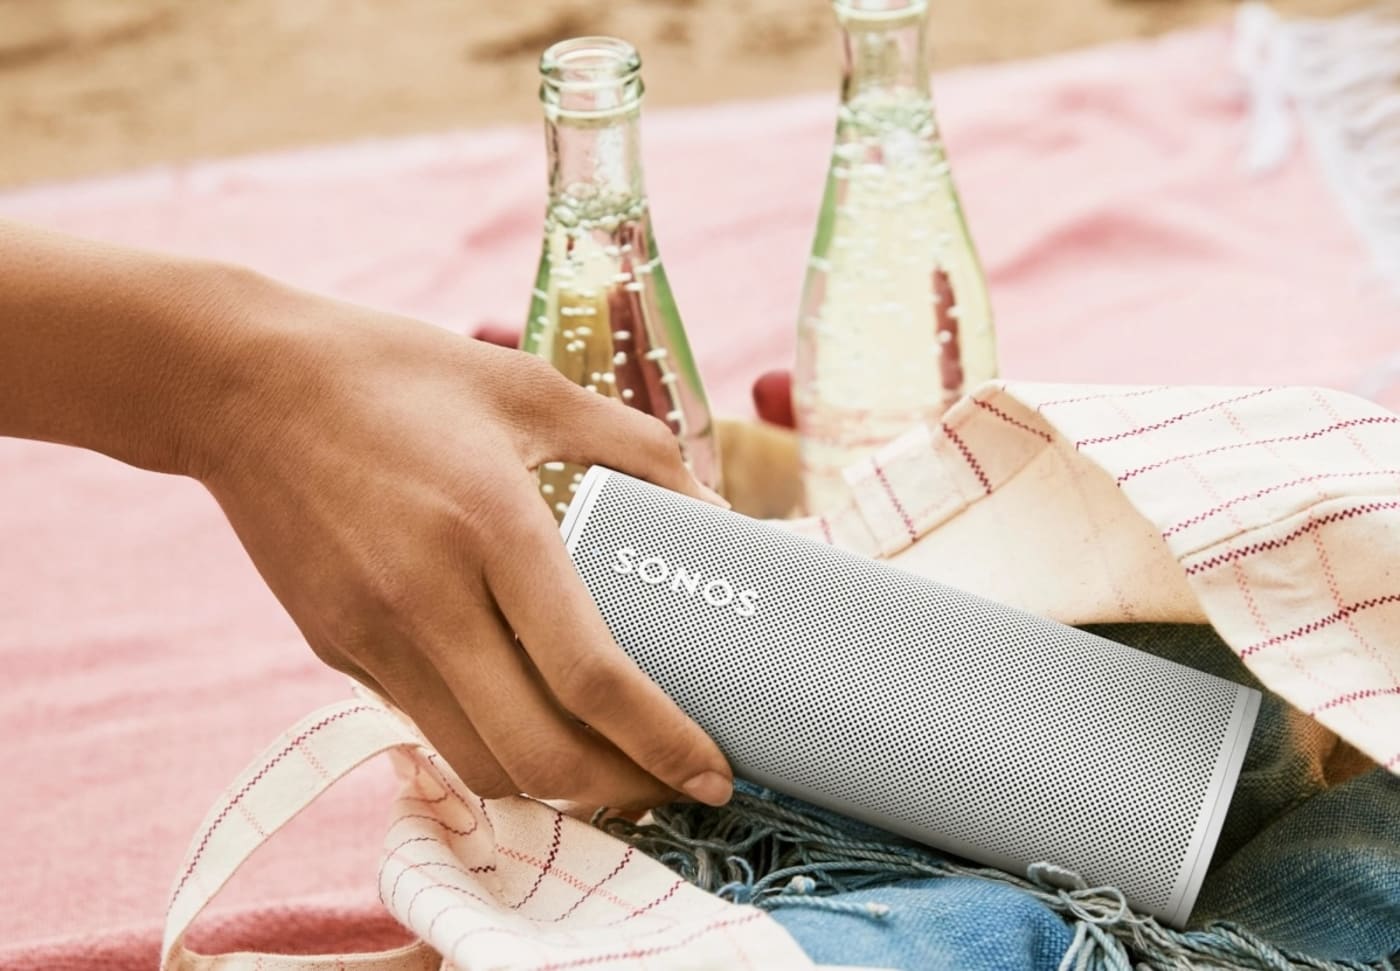 Sonos’ Roam 2 portable speaker may arrive just in time for summer